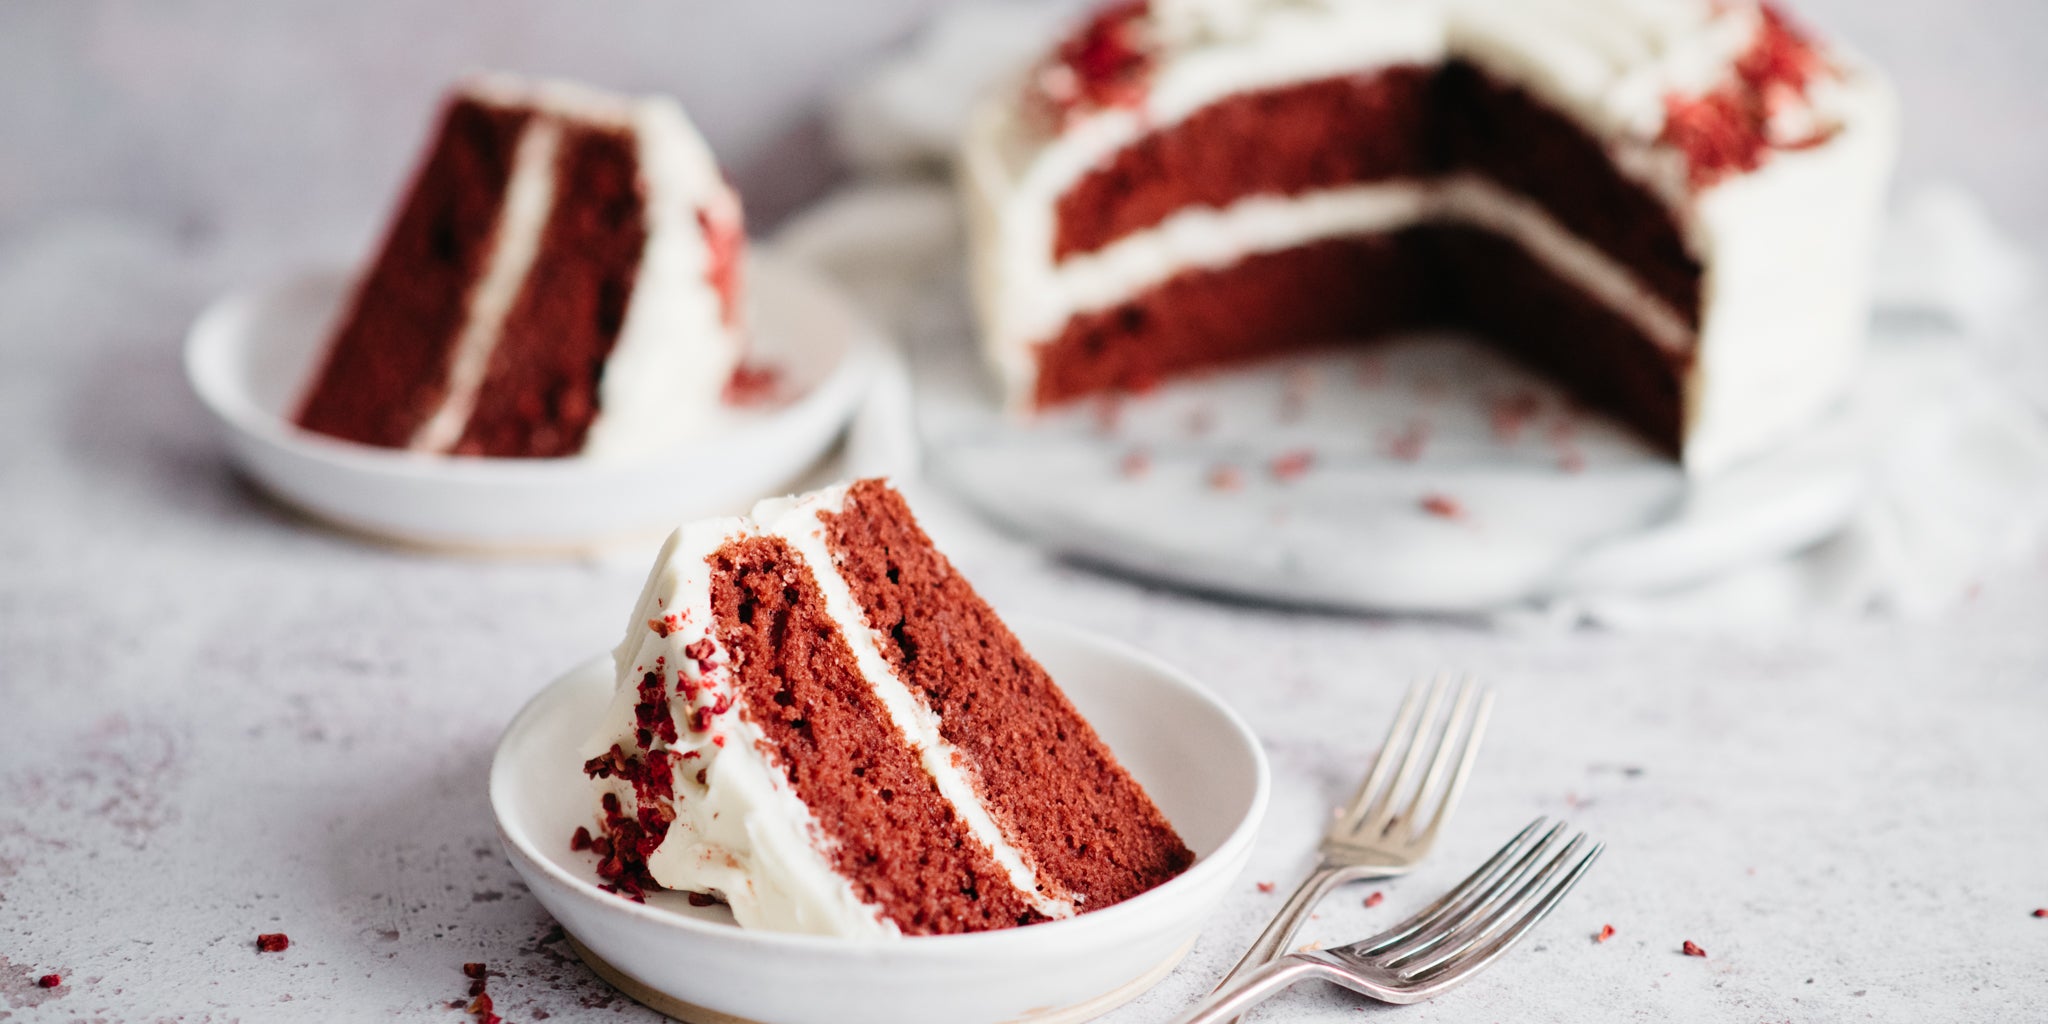 Close up of a slice of Red Velvet Cake served on a plate, showing the rich red insides of the cake